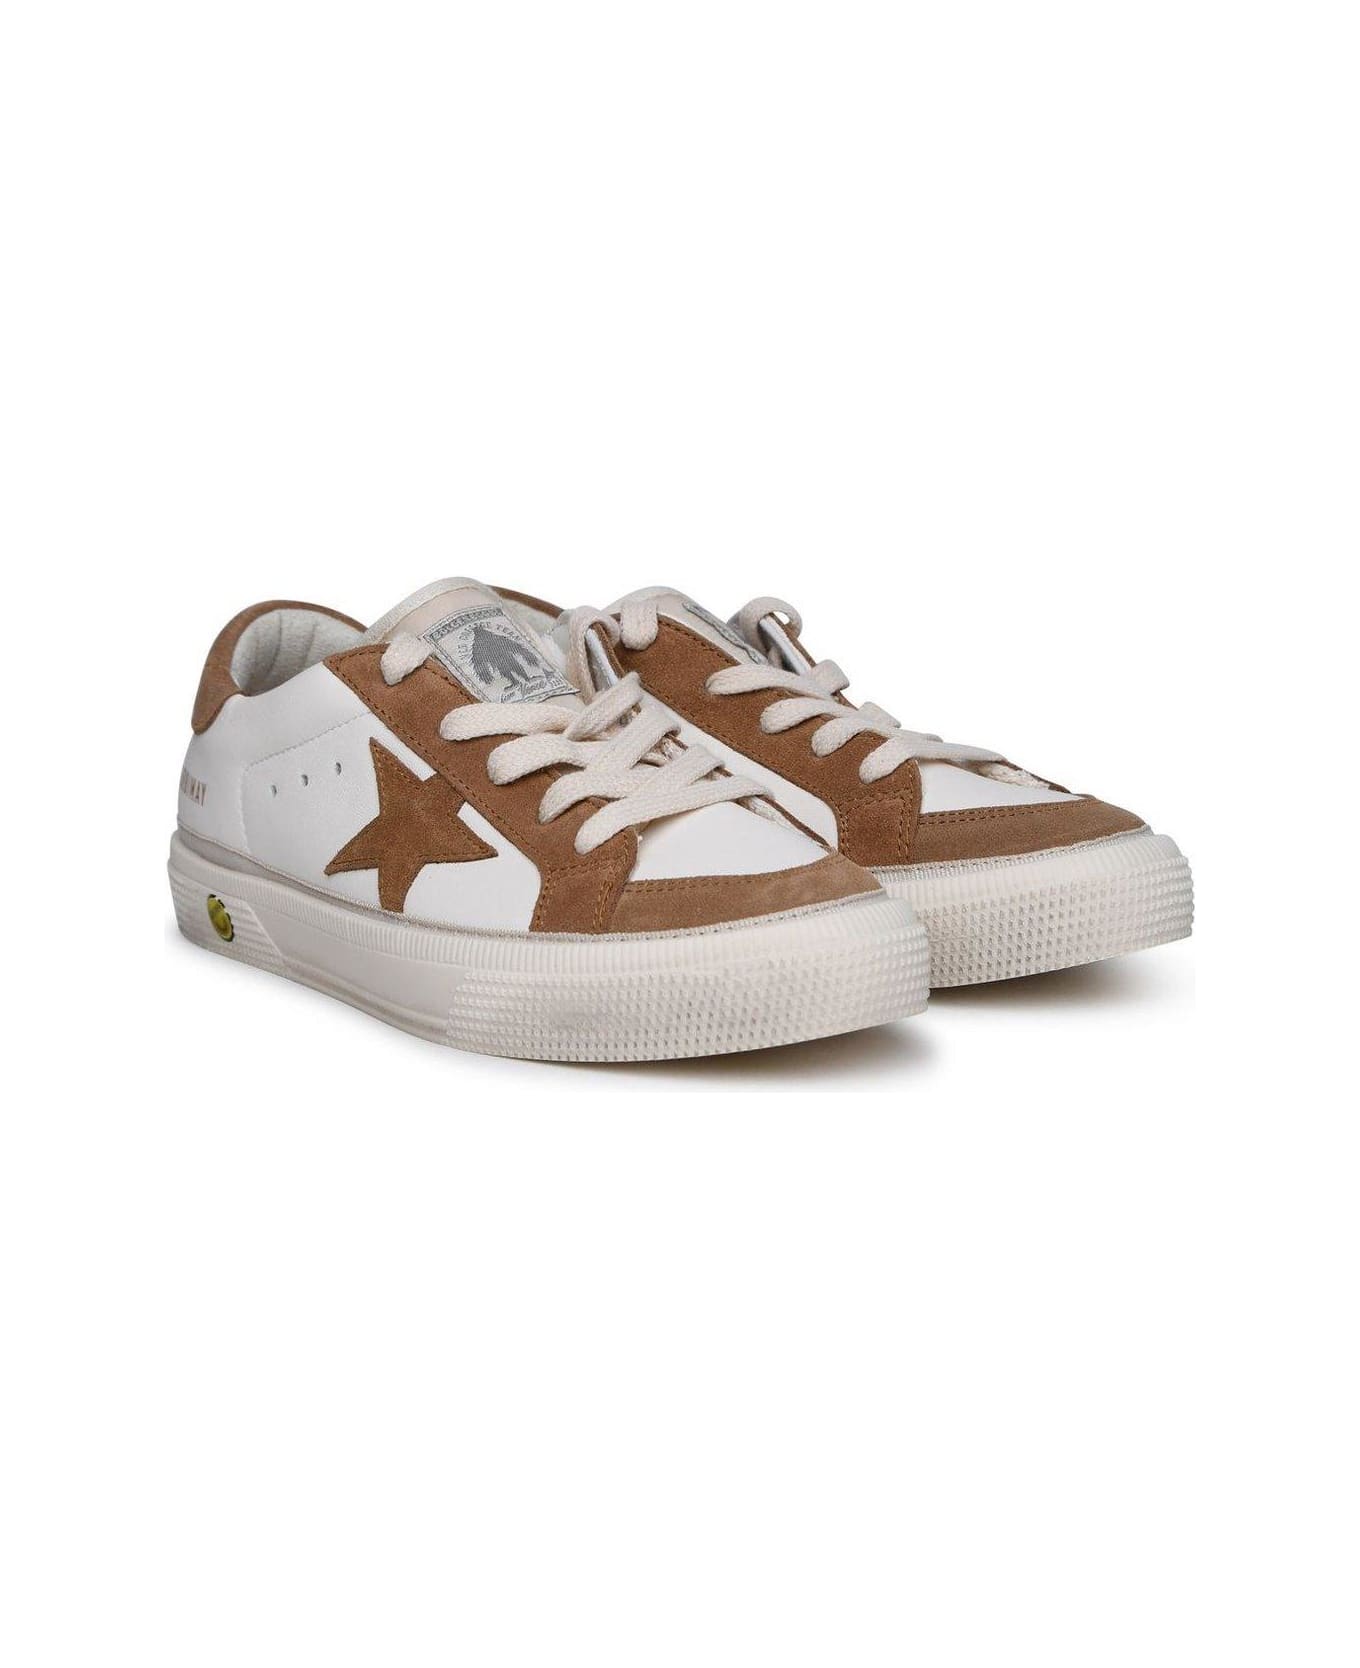 Golden Goose Superstar Lace-up Sneakers - White/Light Brown シューズ